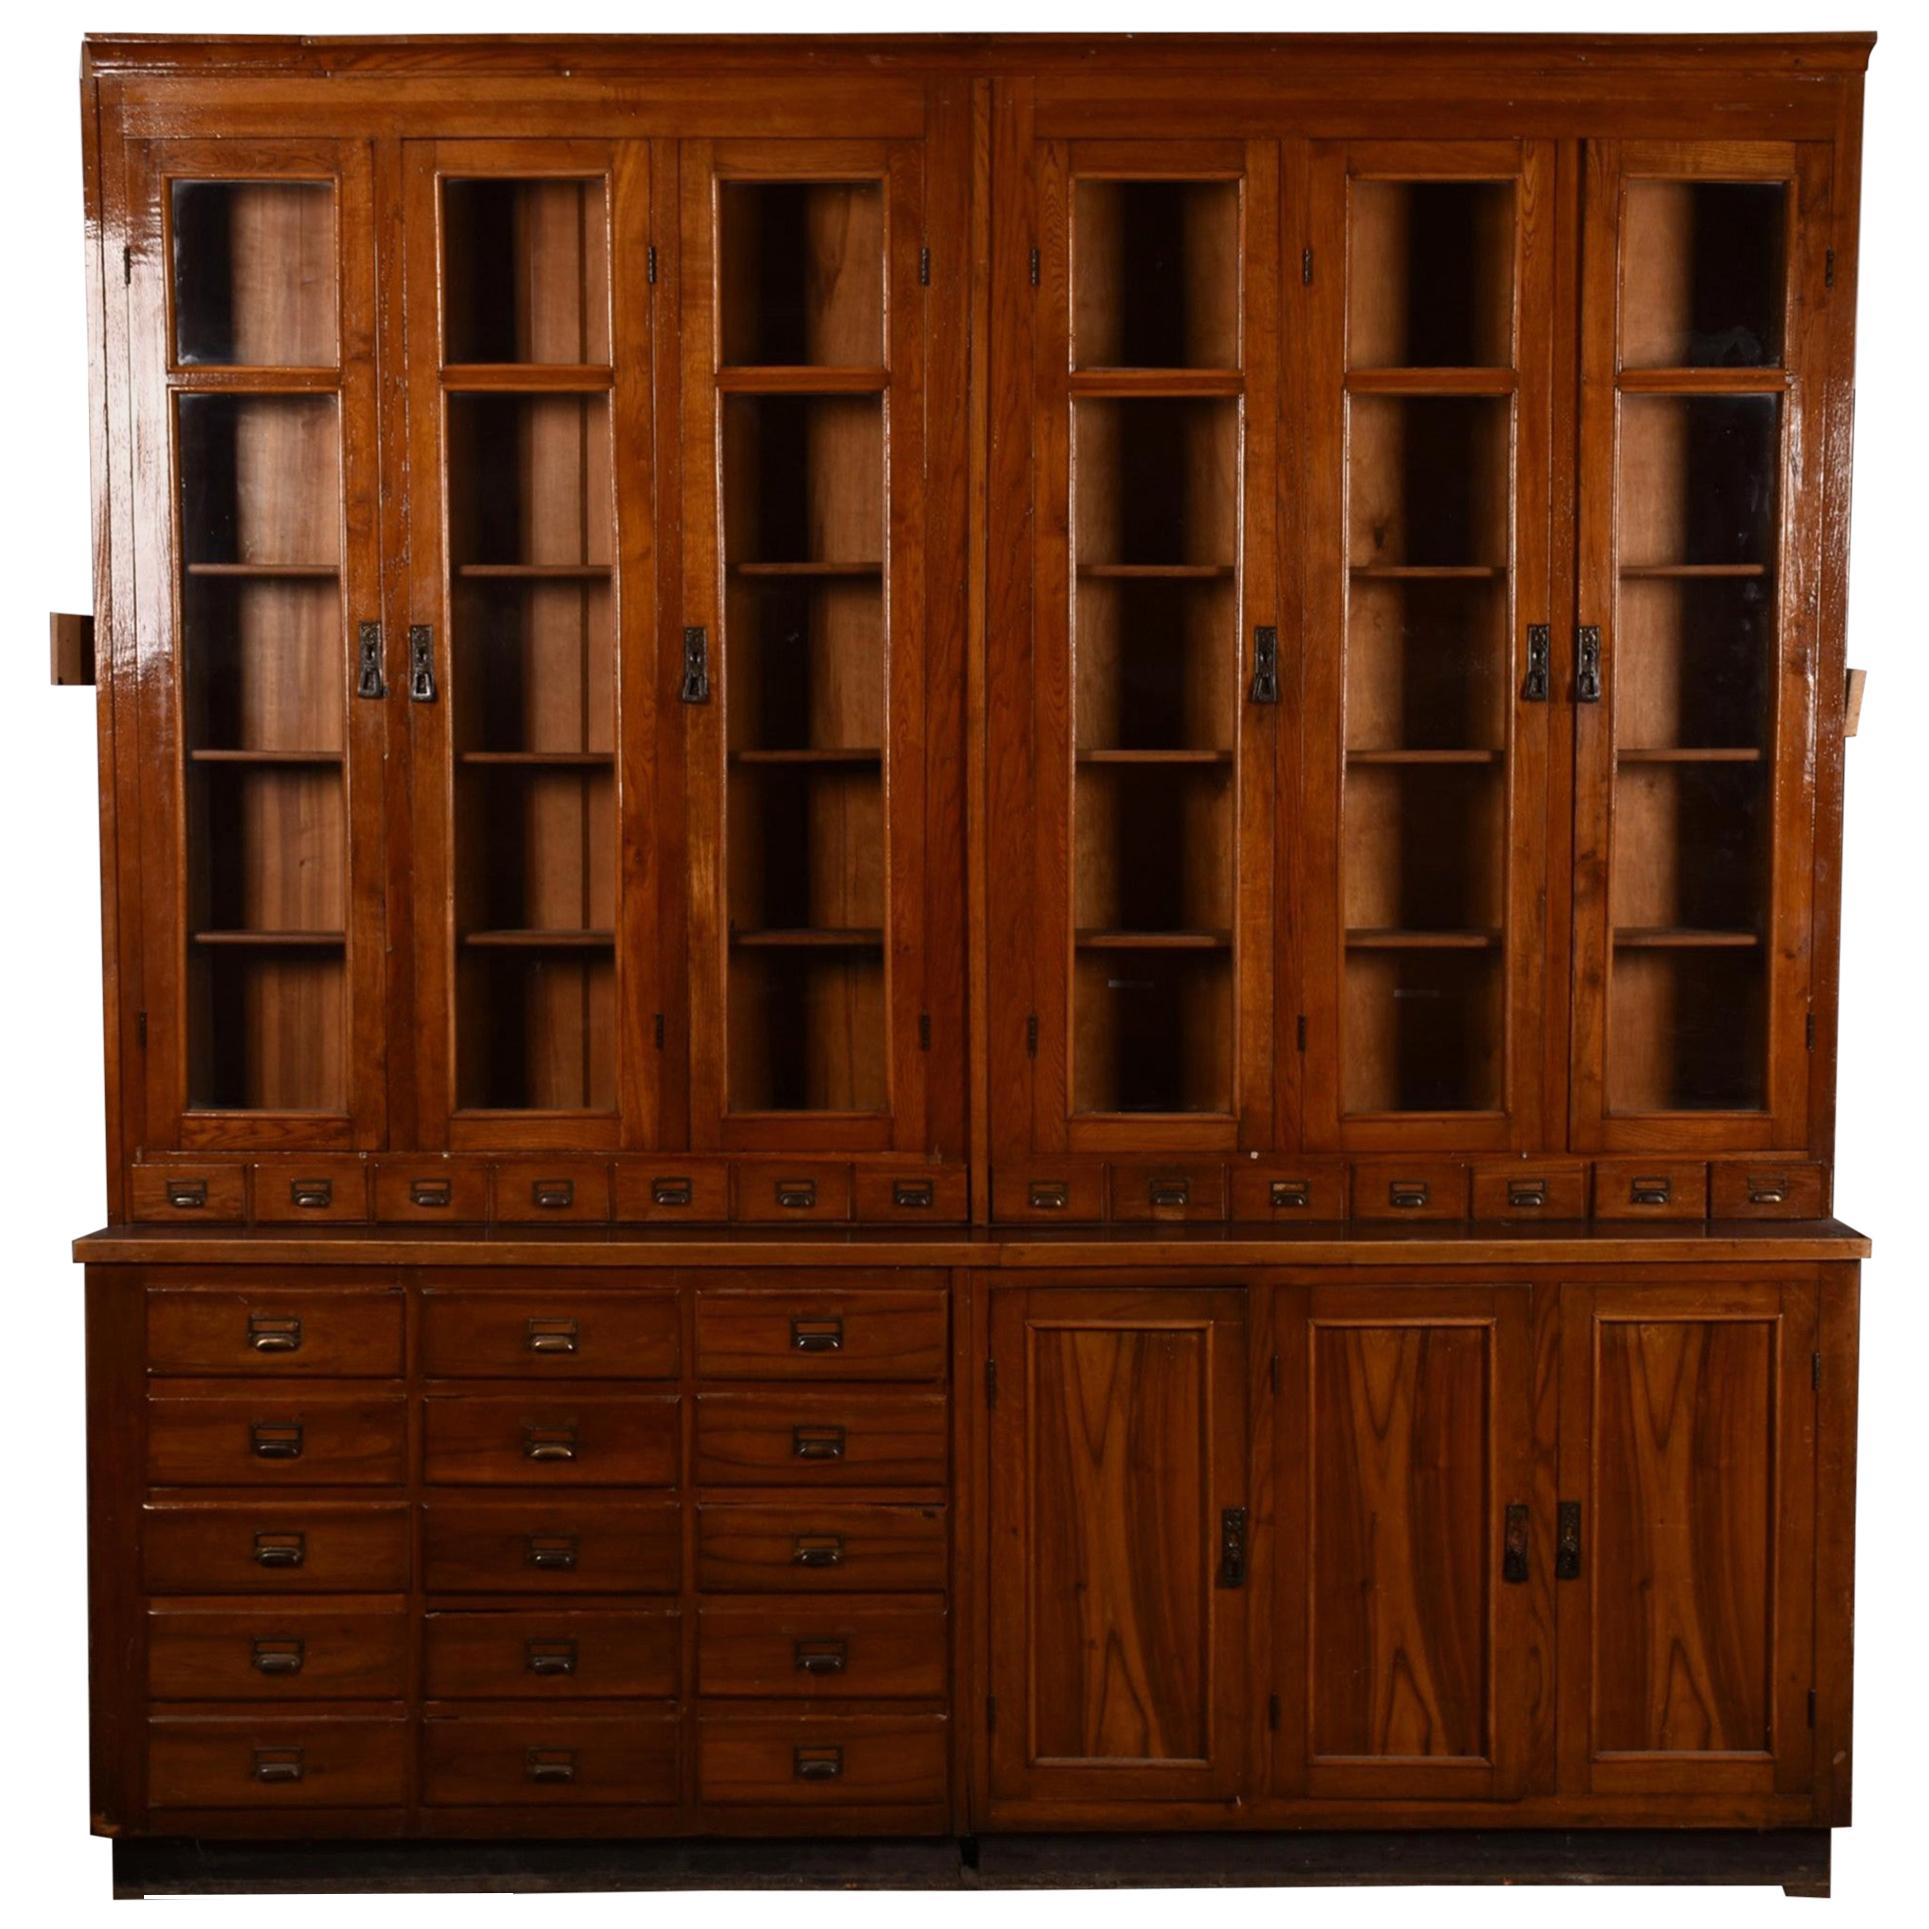 Apothecary No.8


Apothecary display cabinet circa 1930s number 8
Apothecary / Pharmacy / Chemist / Shop Display / Restaurant cabinet, circa 1930s

Large Apothecary Pharmacy beech display cabinet dating to circa 1930s, This piece is one of